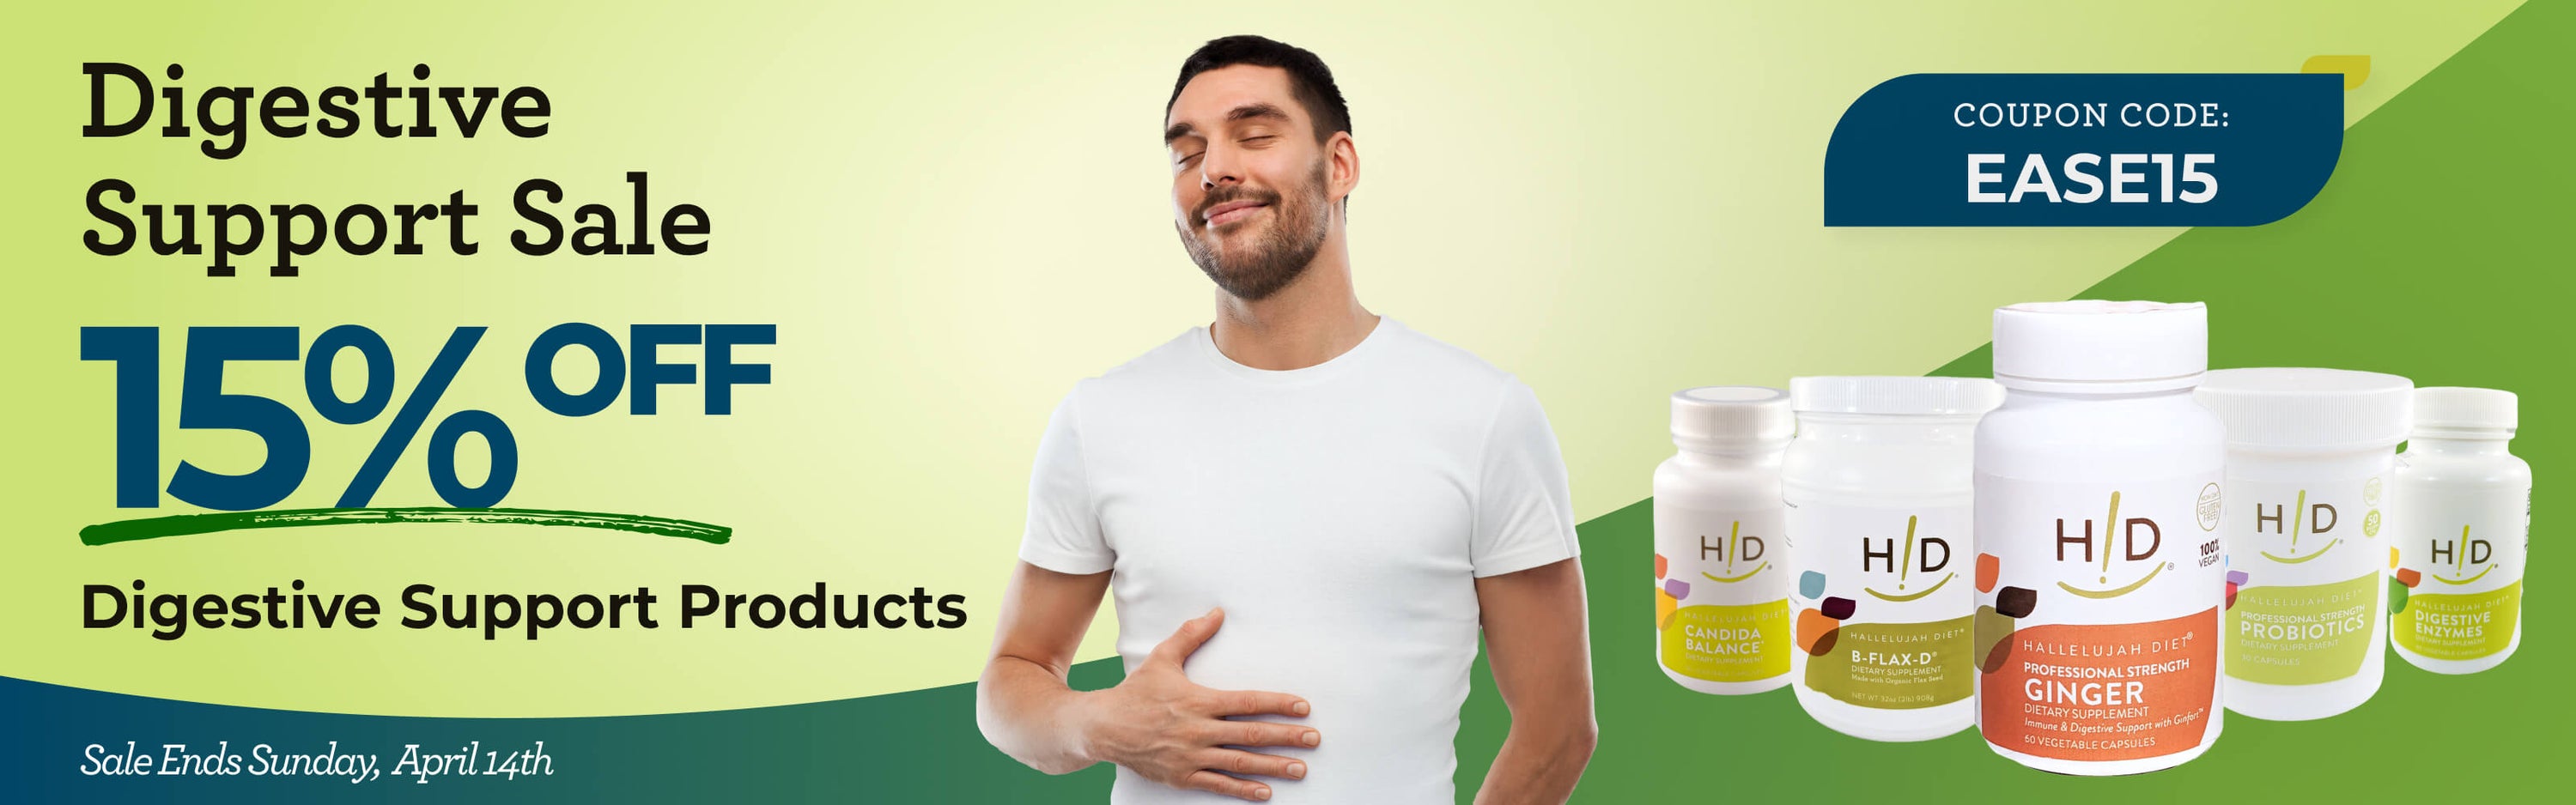 Digestive Support Sale